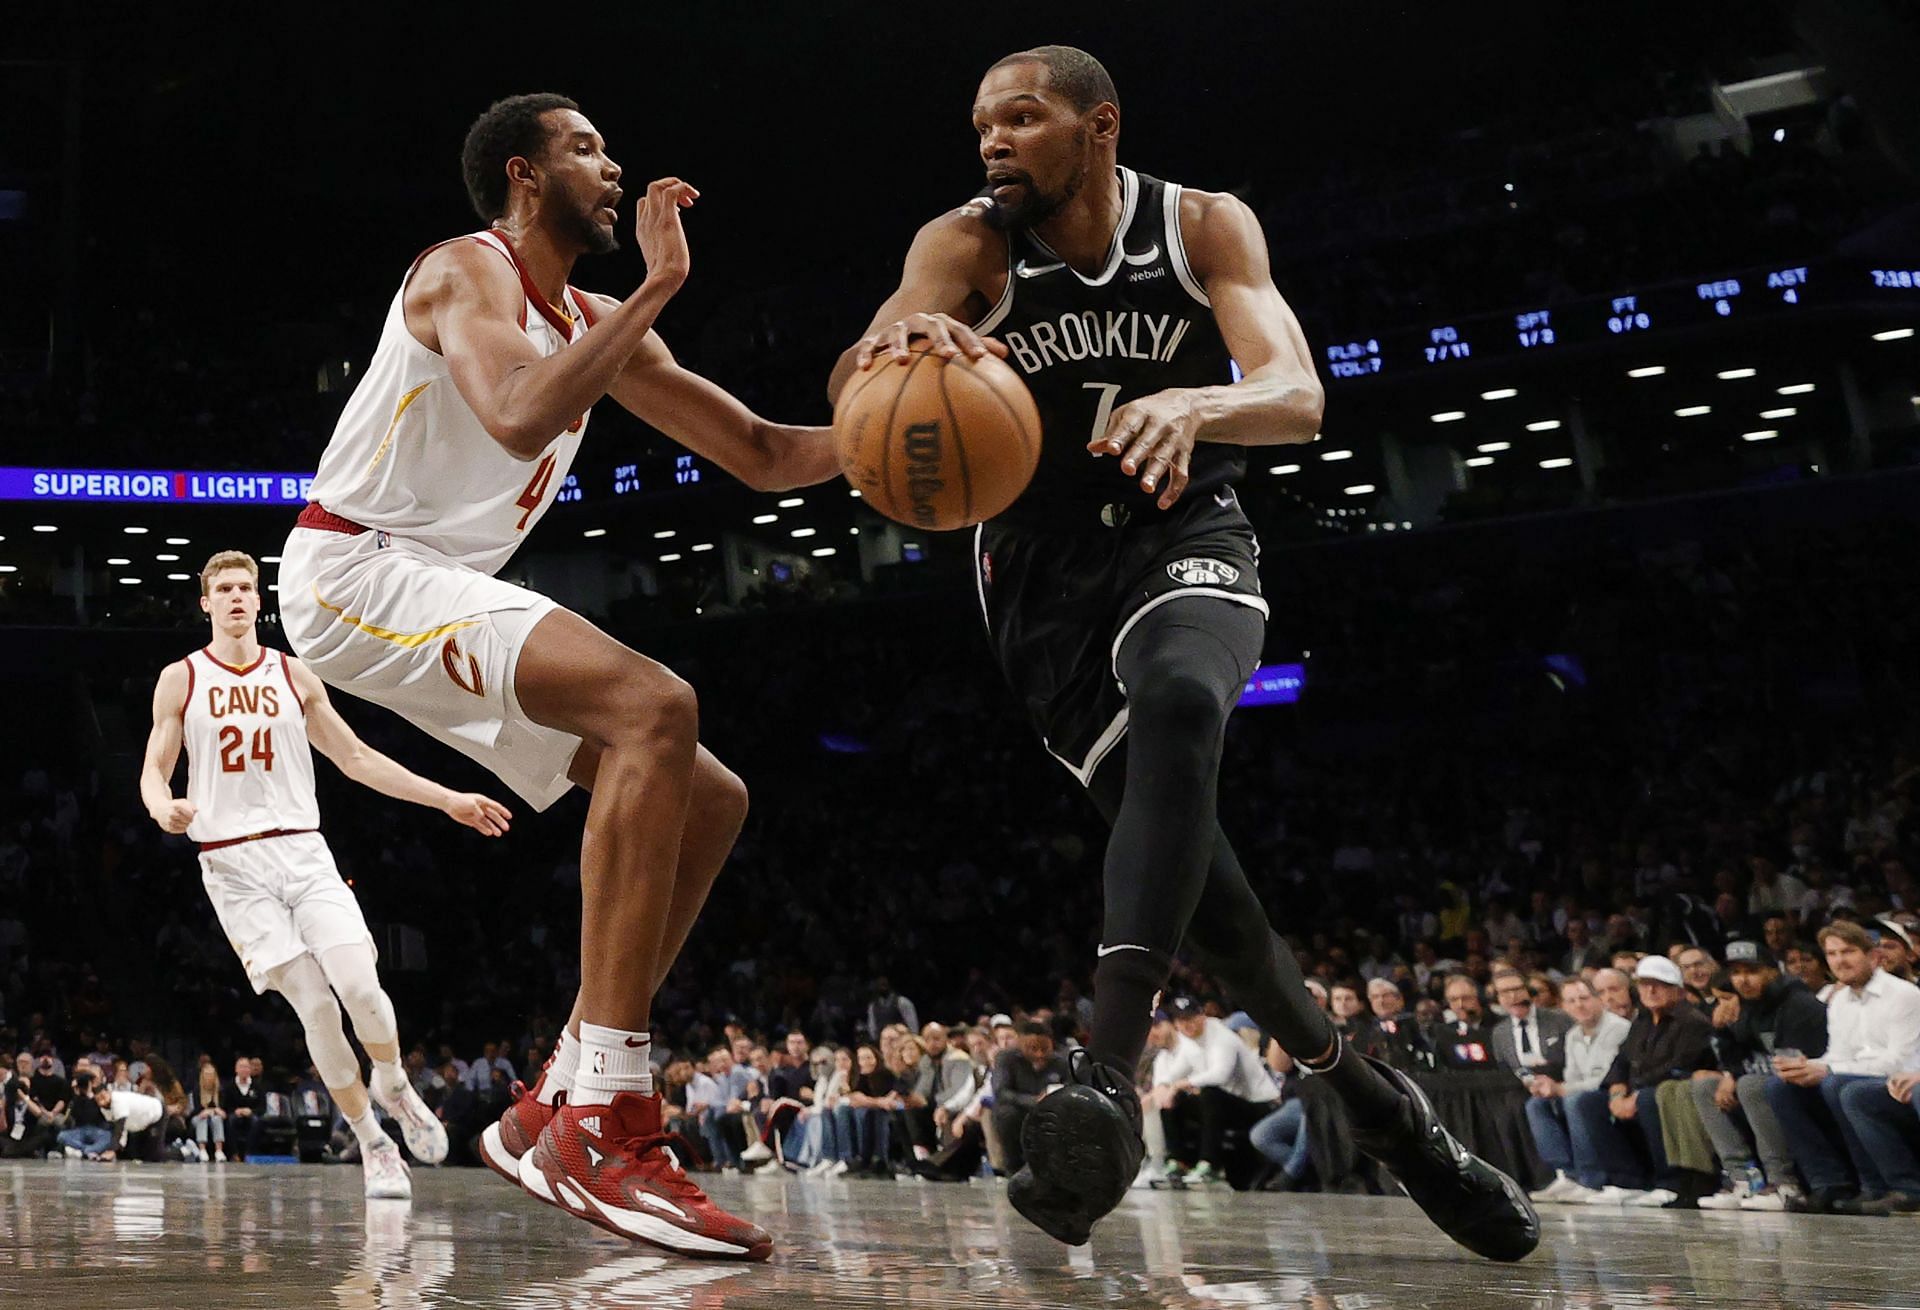 Durant of the Brooklyn Nets dribbles against Evan Mobley No. 4 of the Cleveland Cavaliers during the Eastern Conference 2022 Play-In Tournament.